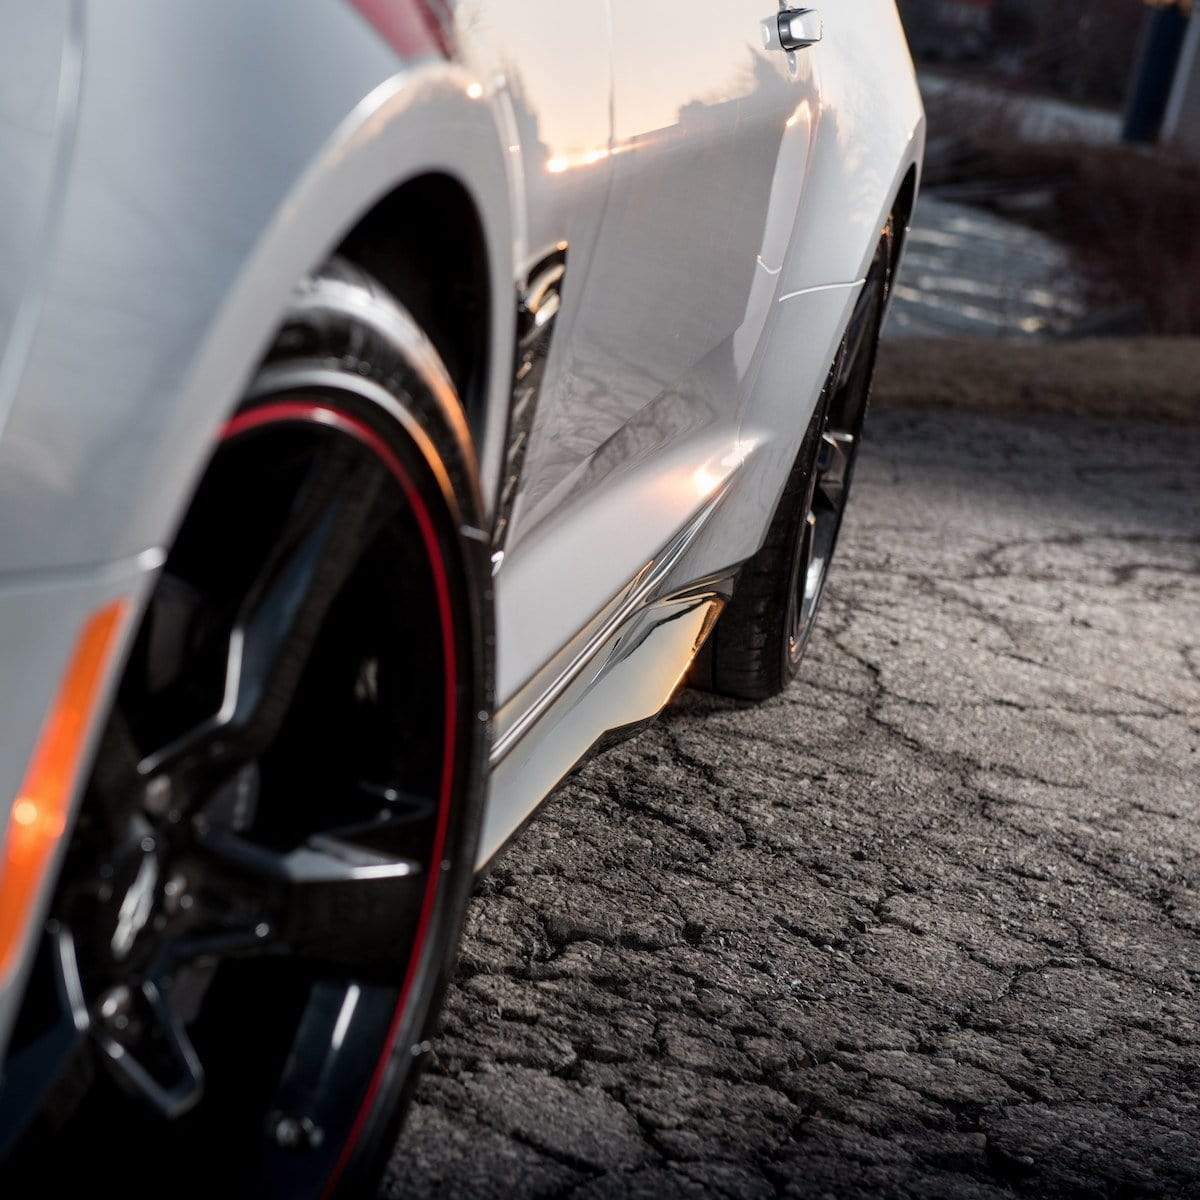 ACS Composite ZL1 Side Rockers for Camaro 2016+, lightweight and durable PC composite material, SKU 48-4-039